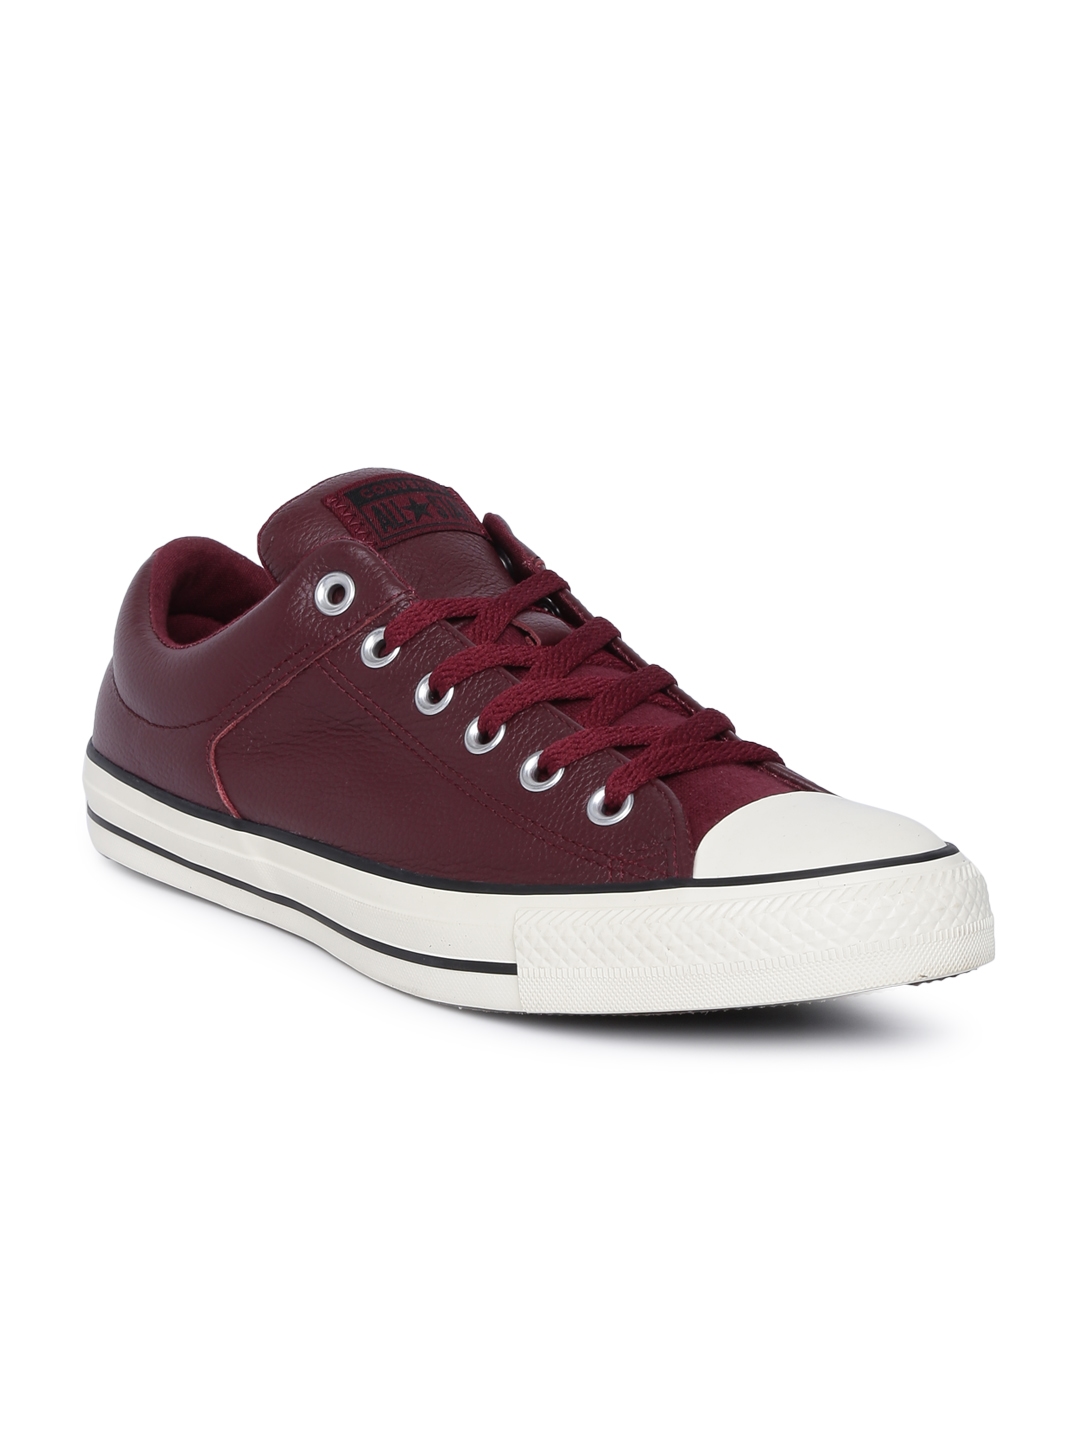 Buy Converse Post Game Chuck Taylor All Star High Street Maroon Solid  Leather Sneakers - Casual Shoes for Unisex 6886592 | Myntra